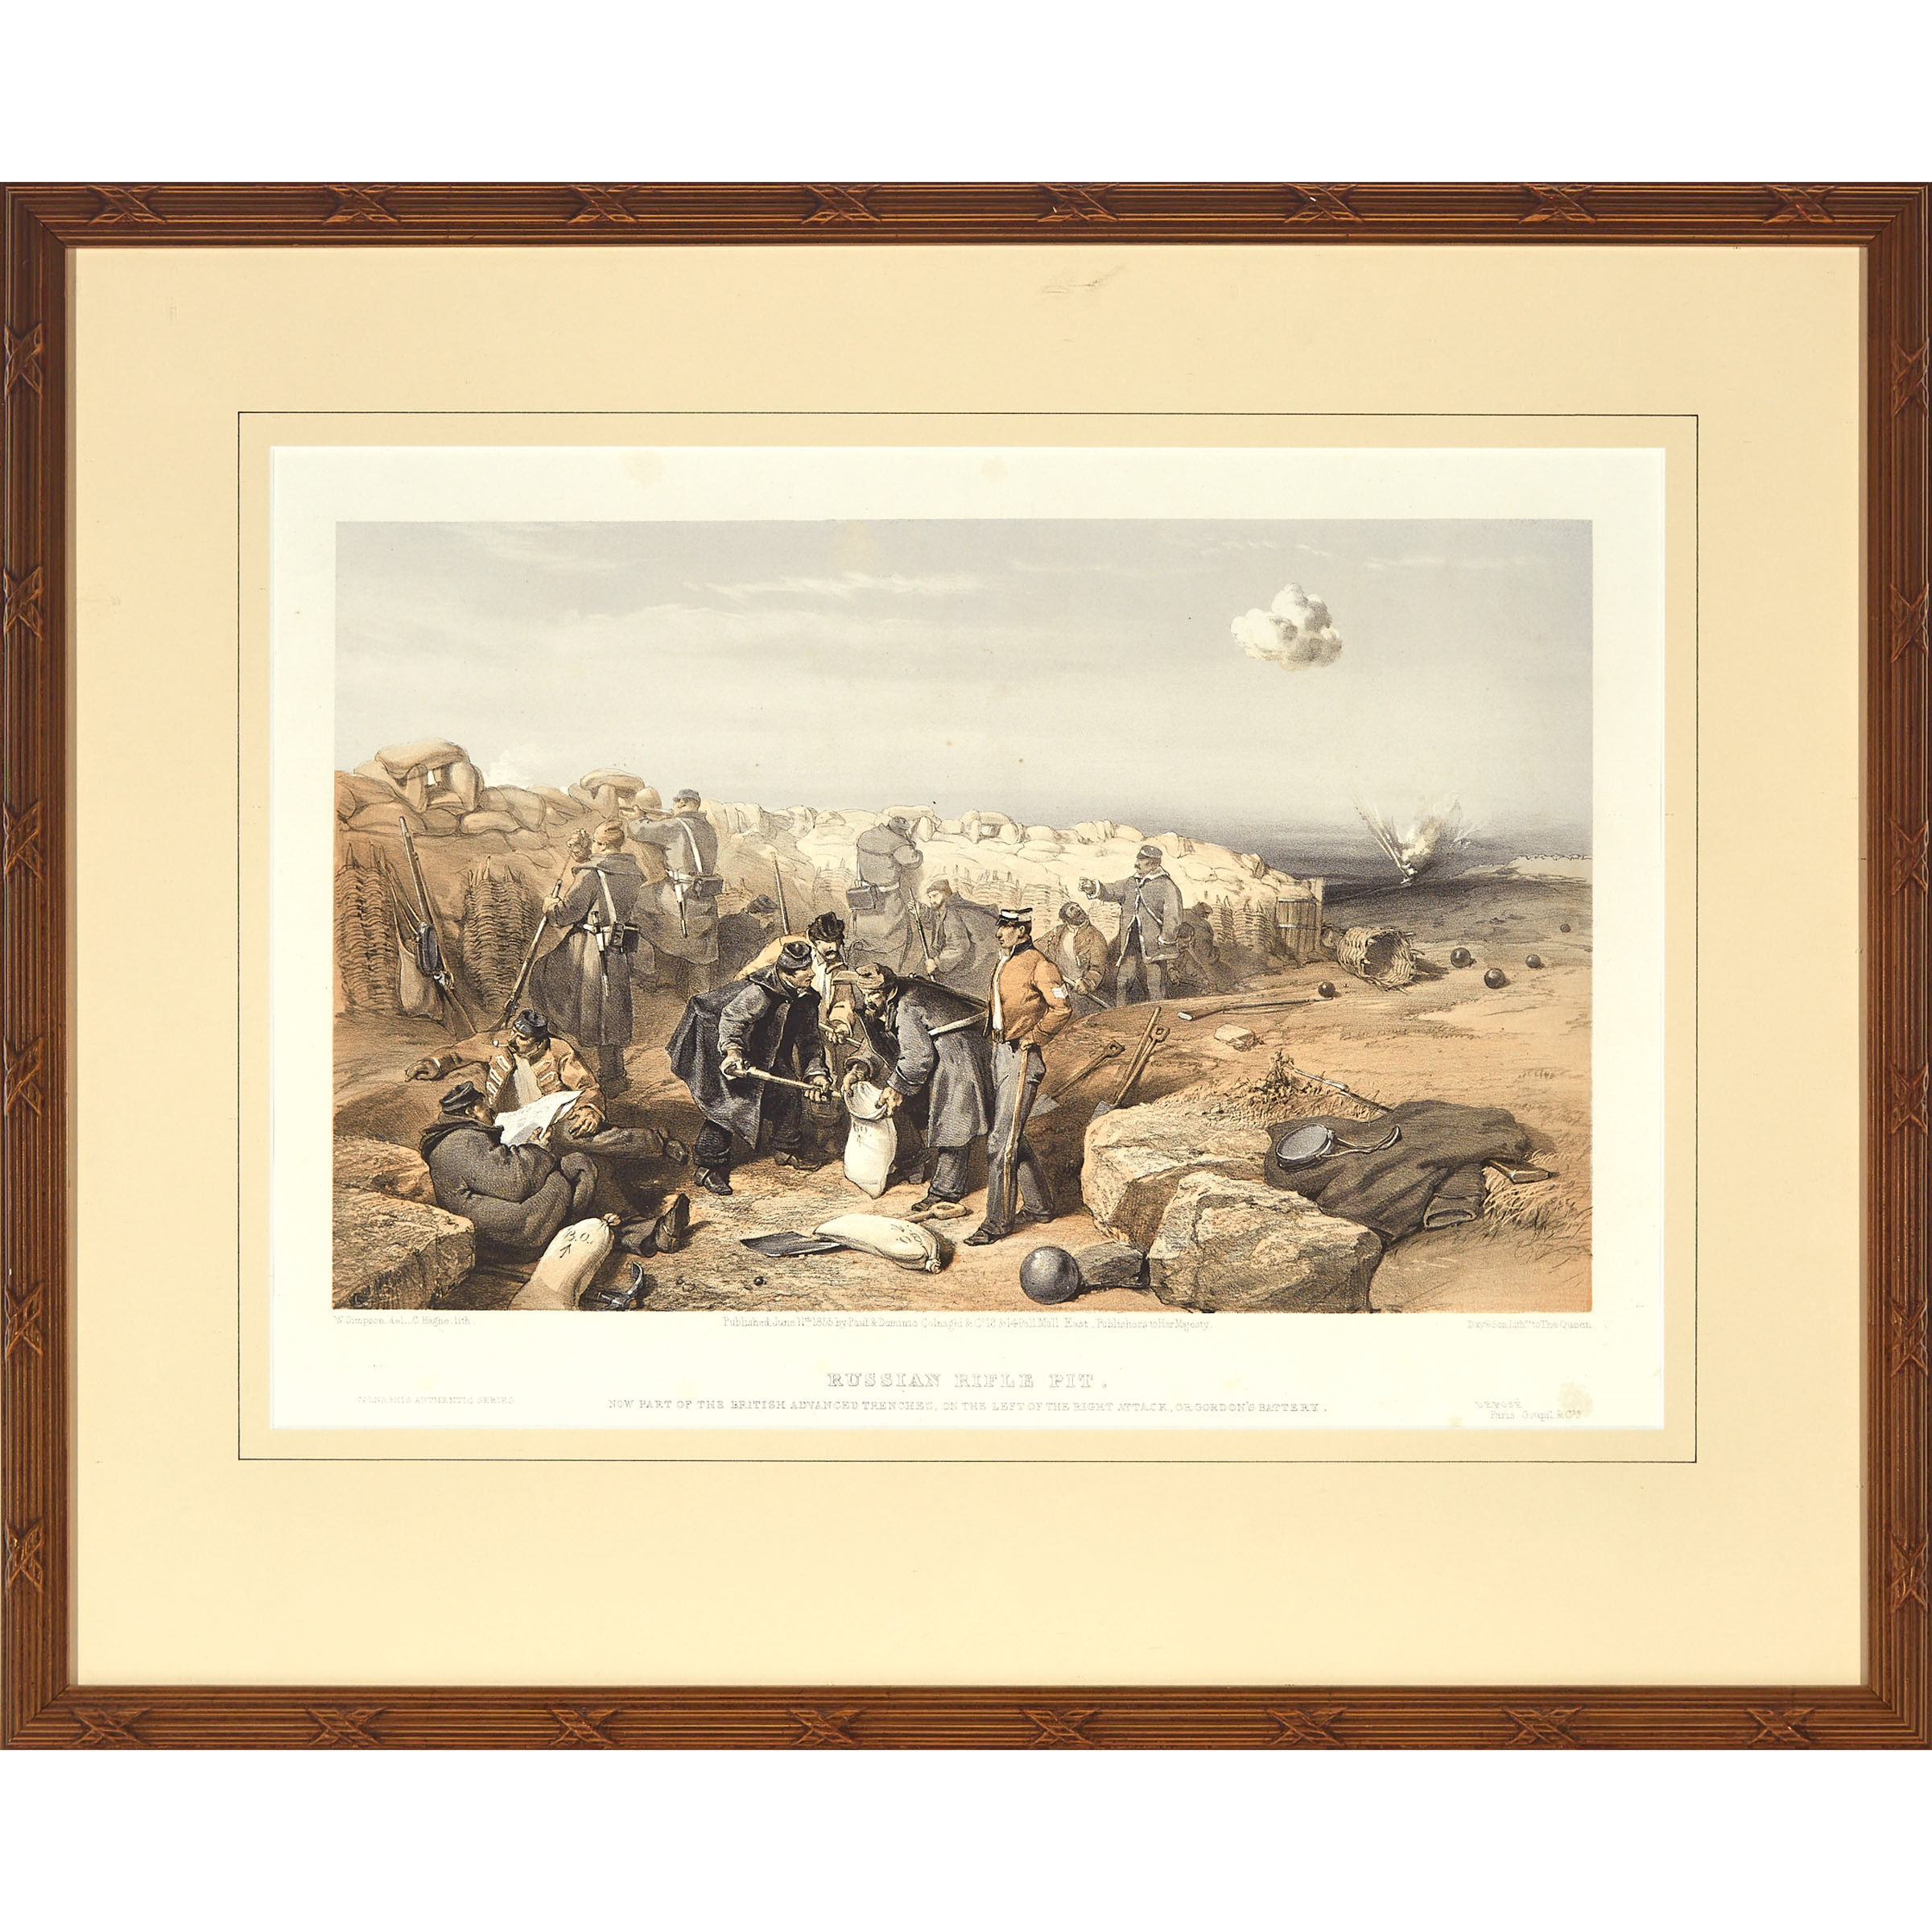 Pair of French Lithographs: Charge of the Heavy Cavalry Brigade and Russian Rifle Pit